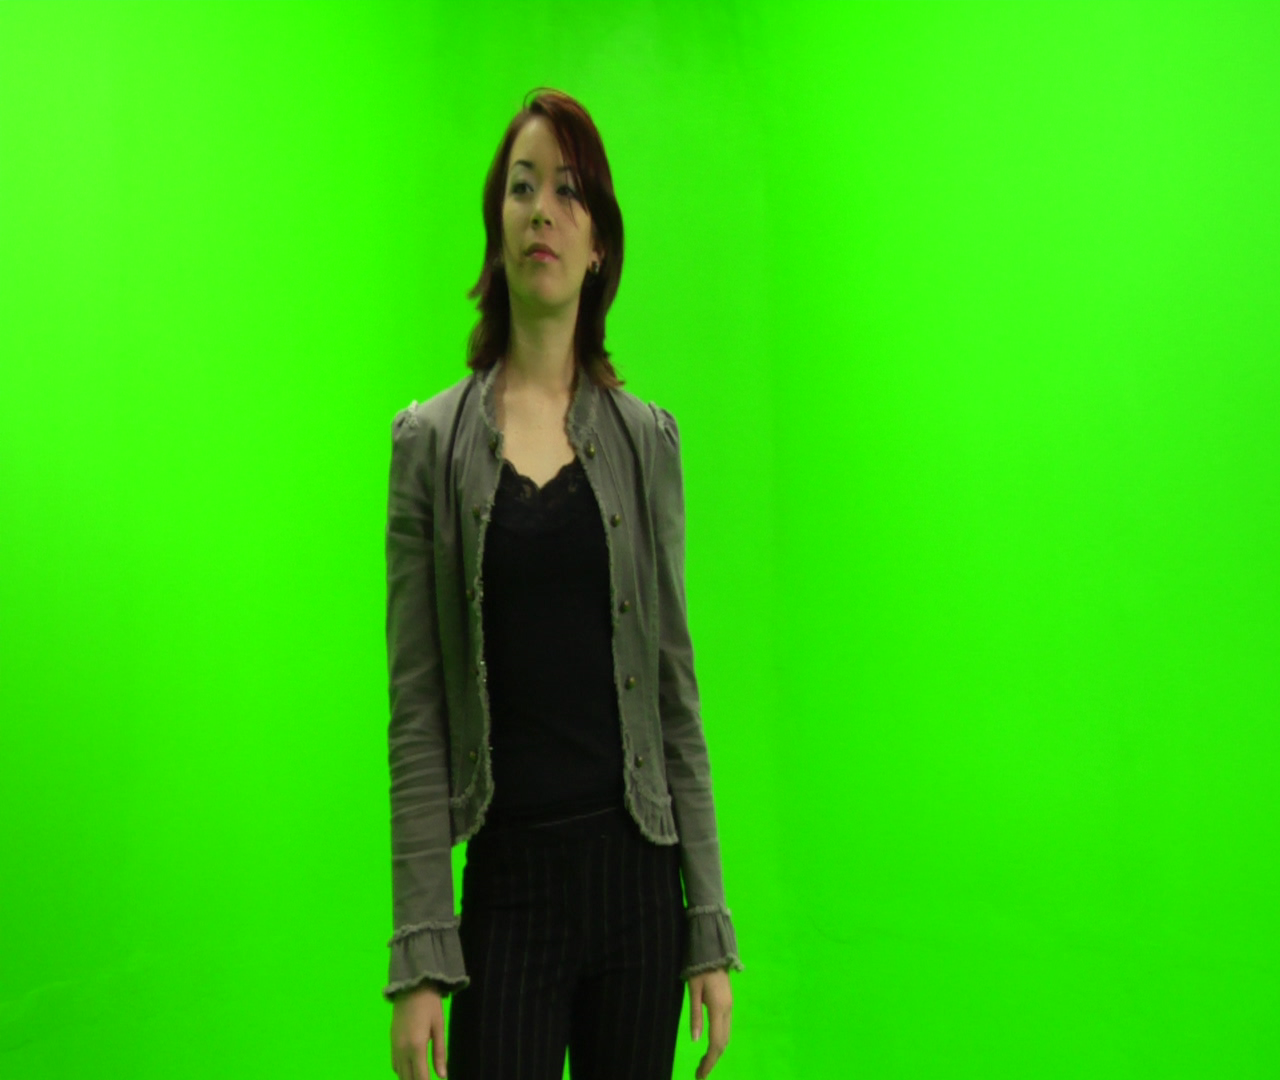 image of a women against a green screen